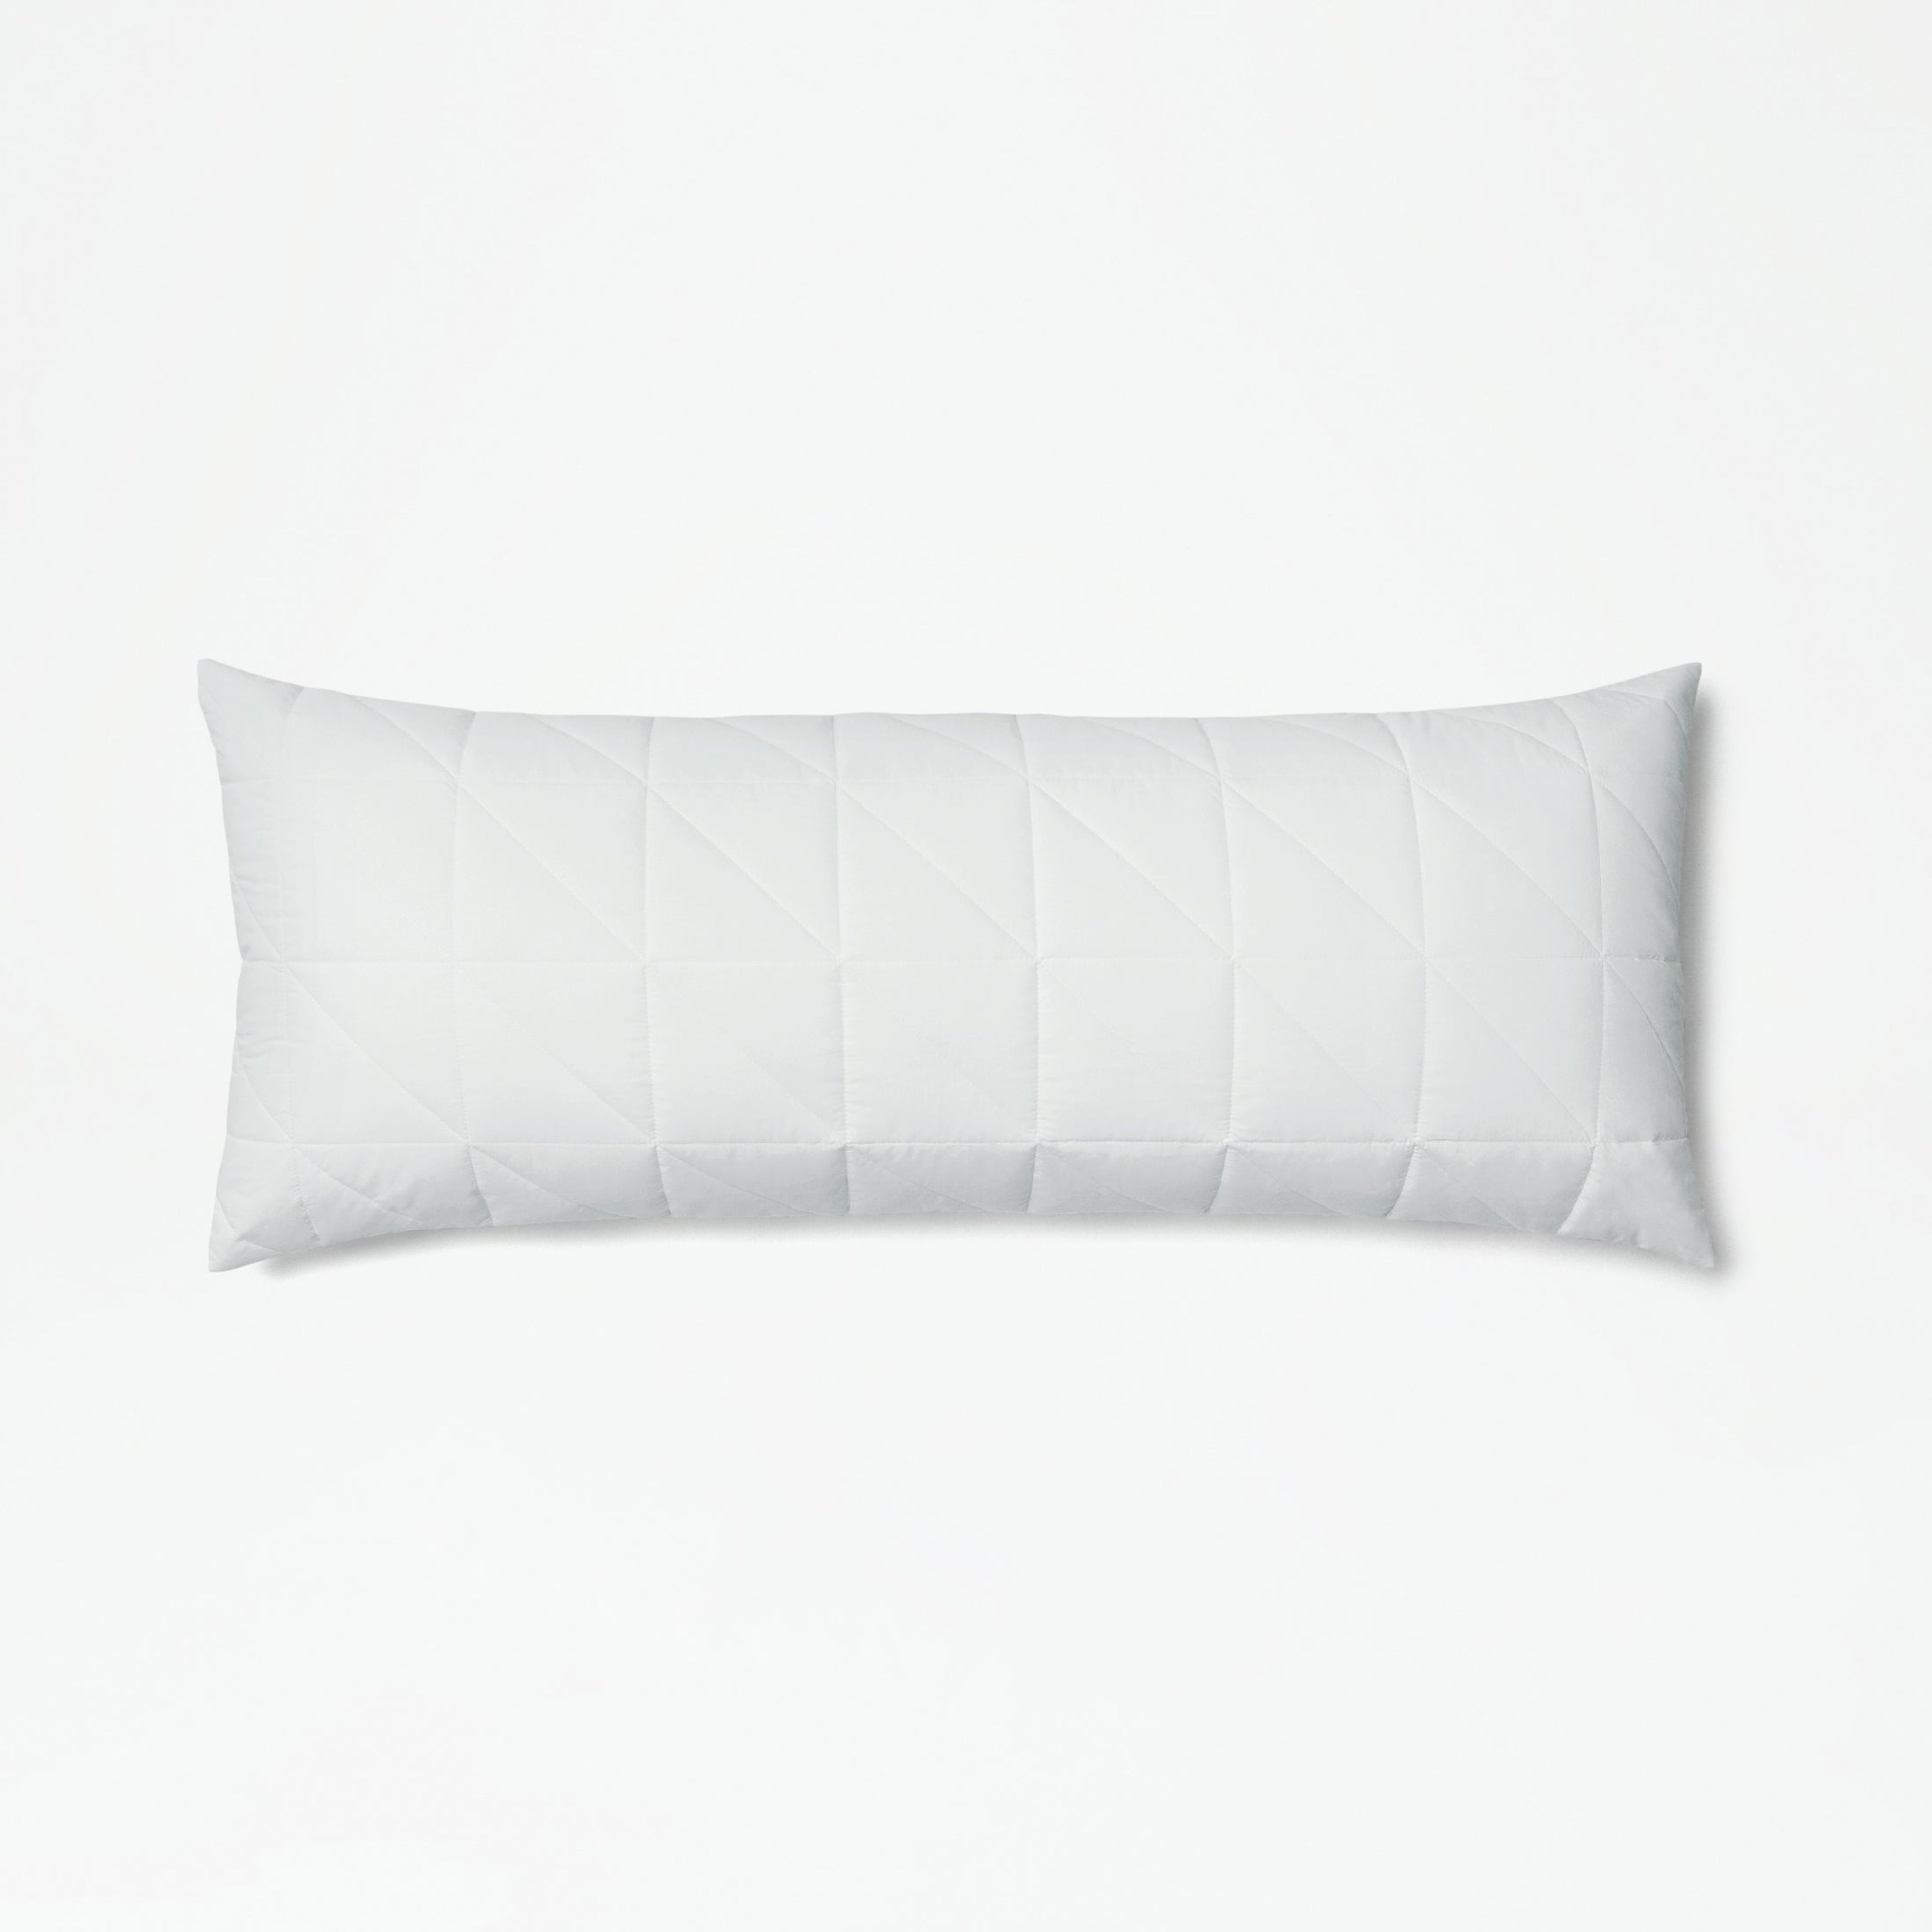 Percale Body Pillow Cover